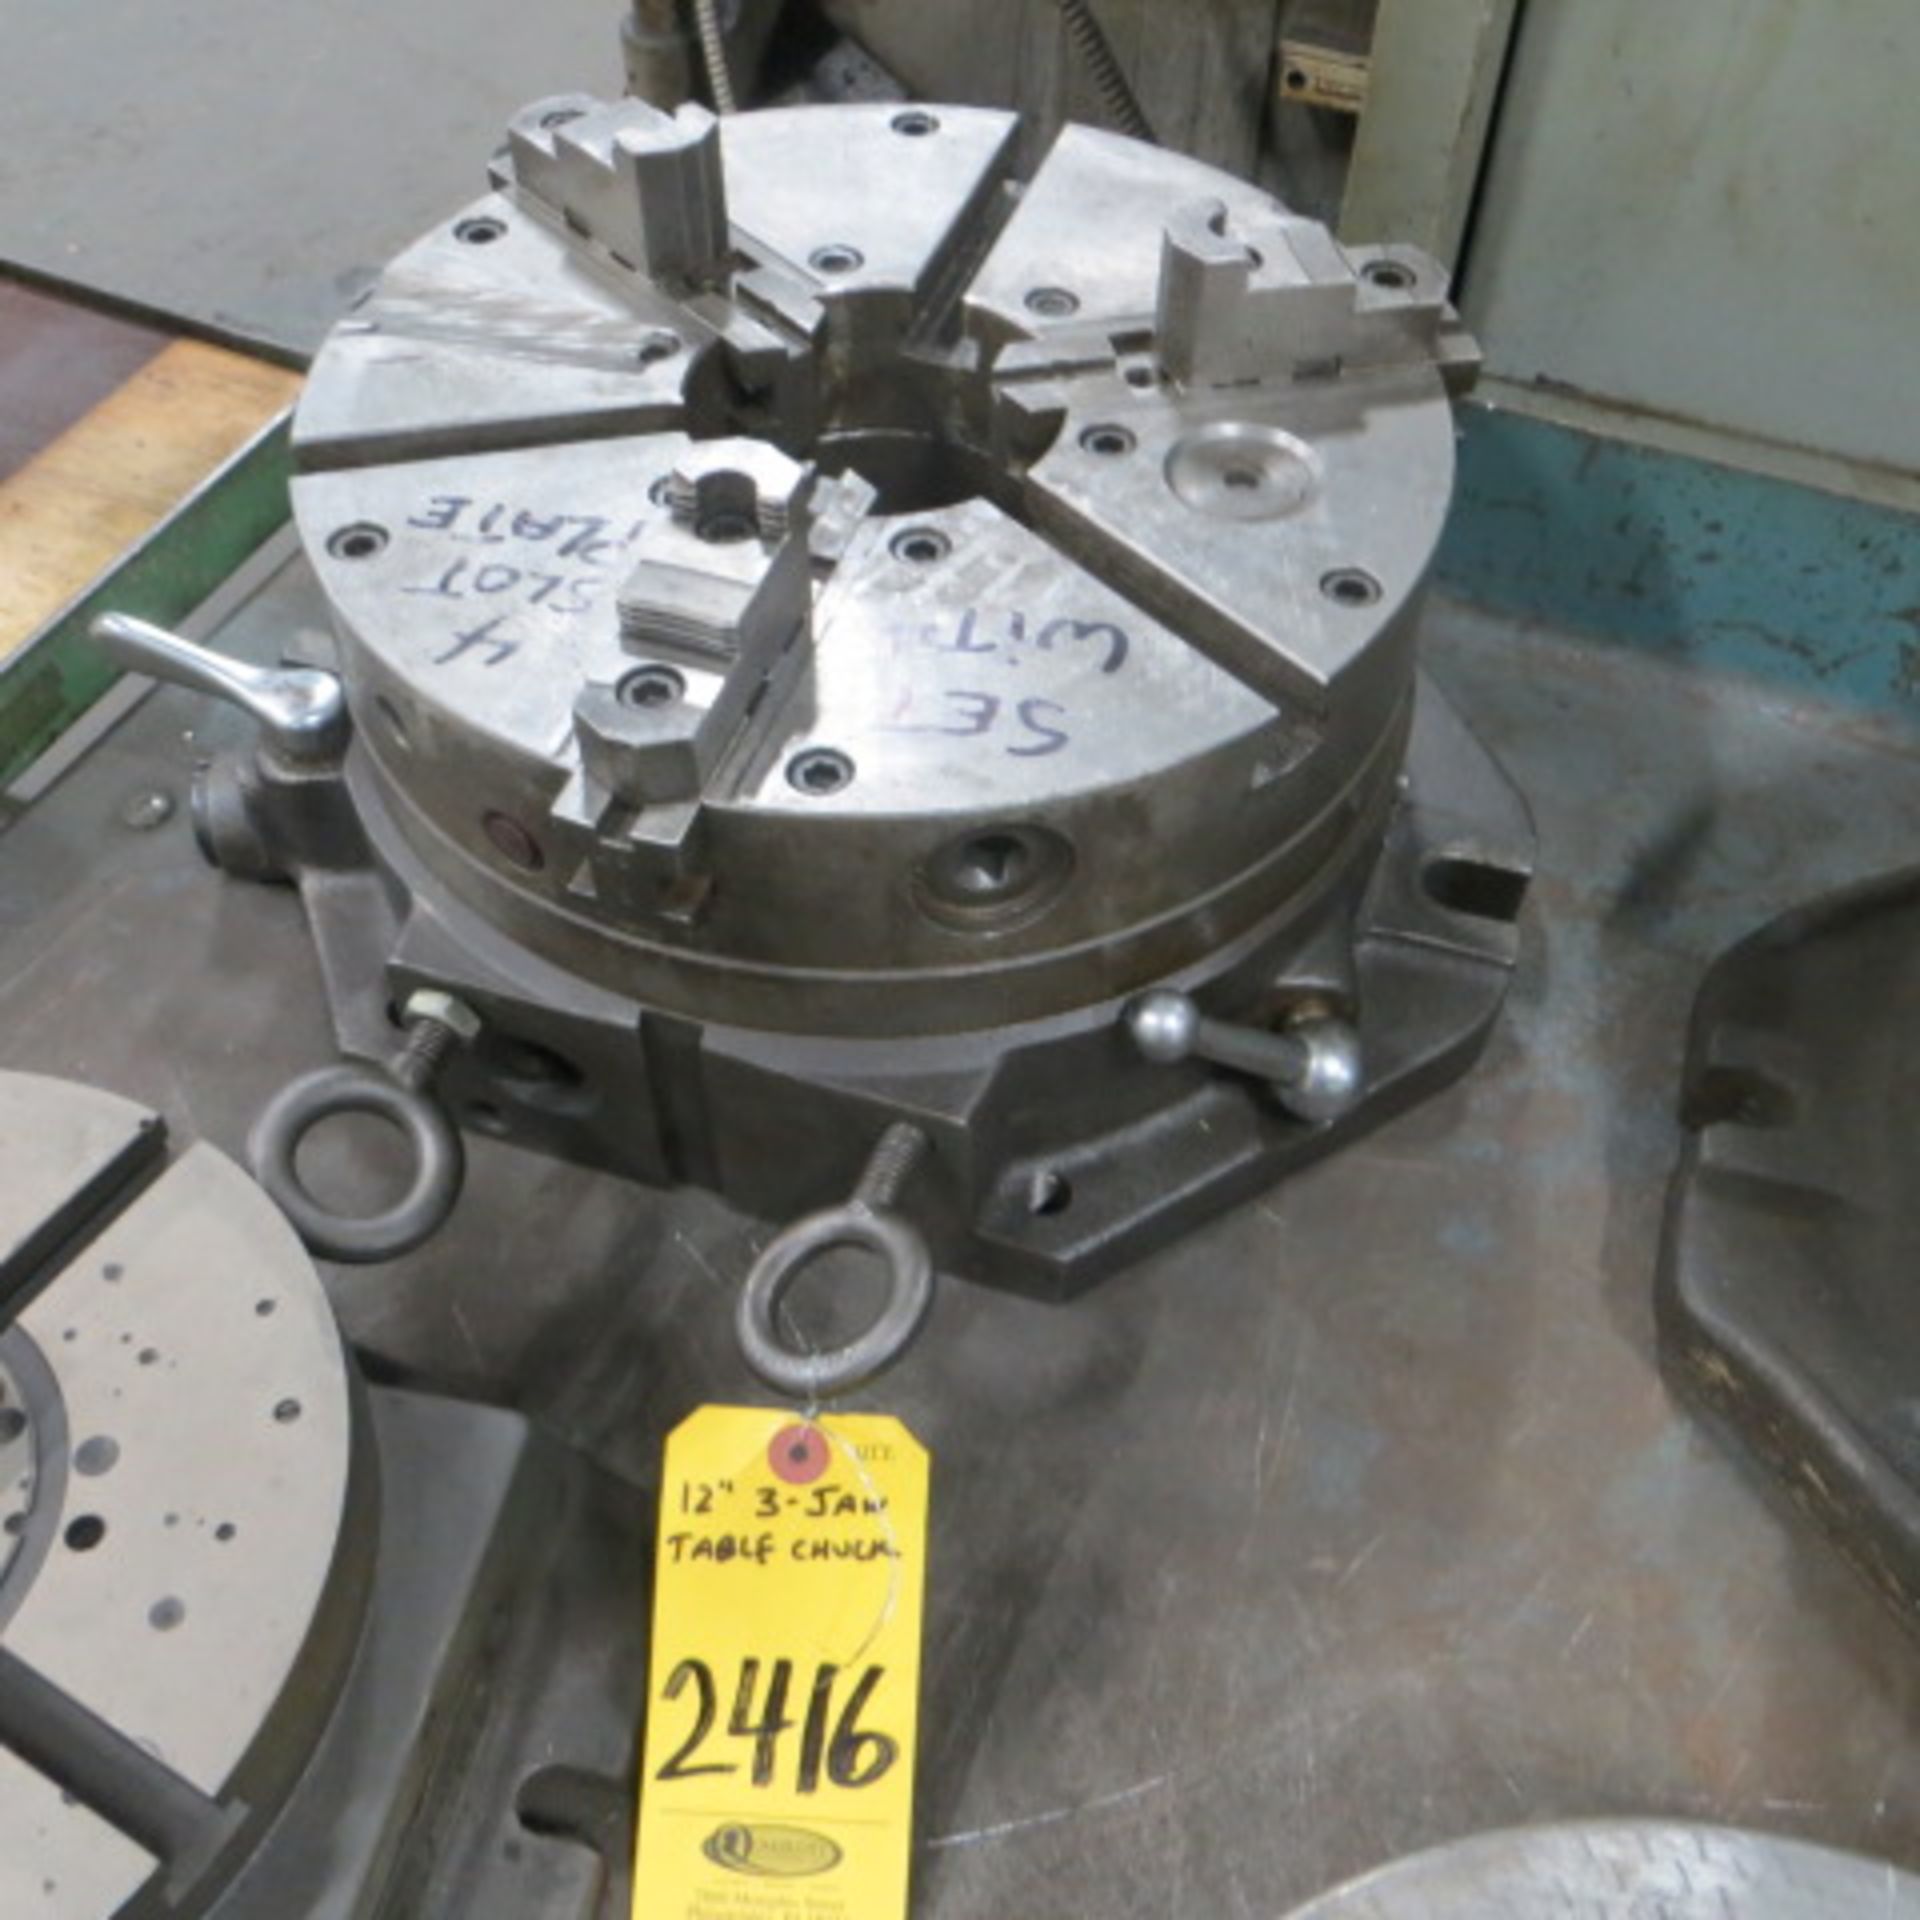 12 IN 3-JAW ROTARY CHUCK